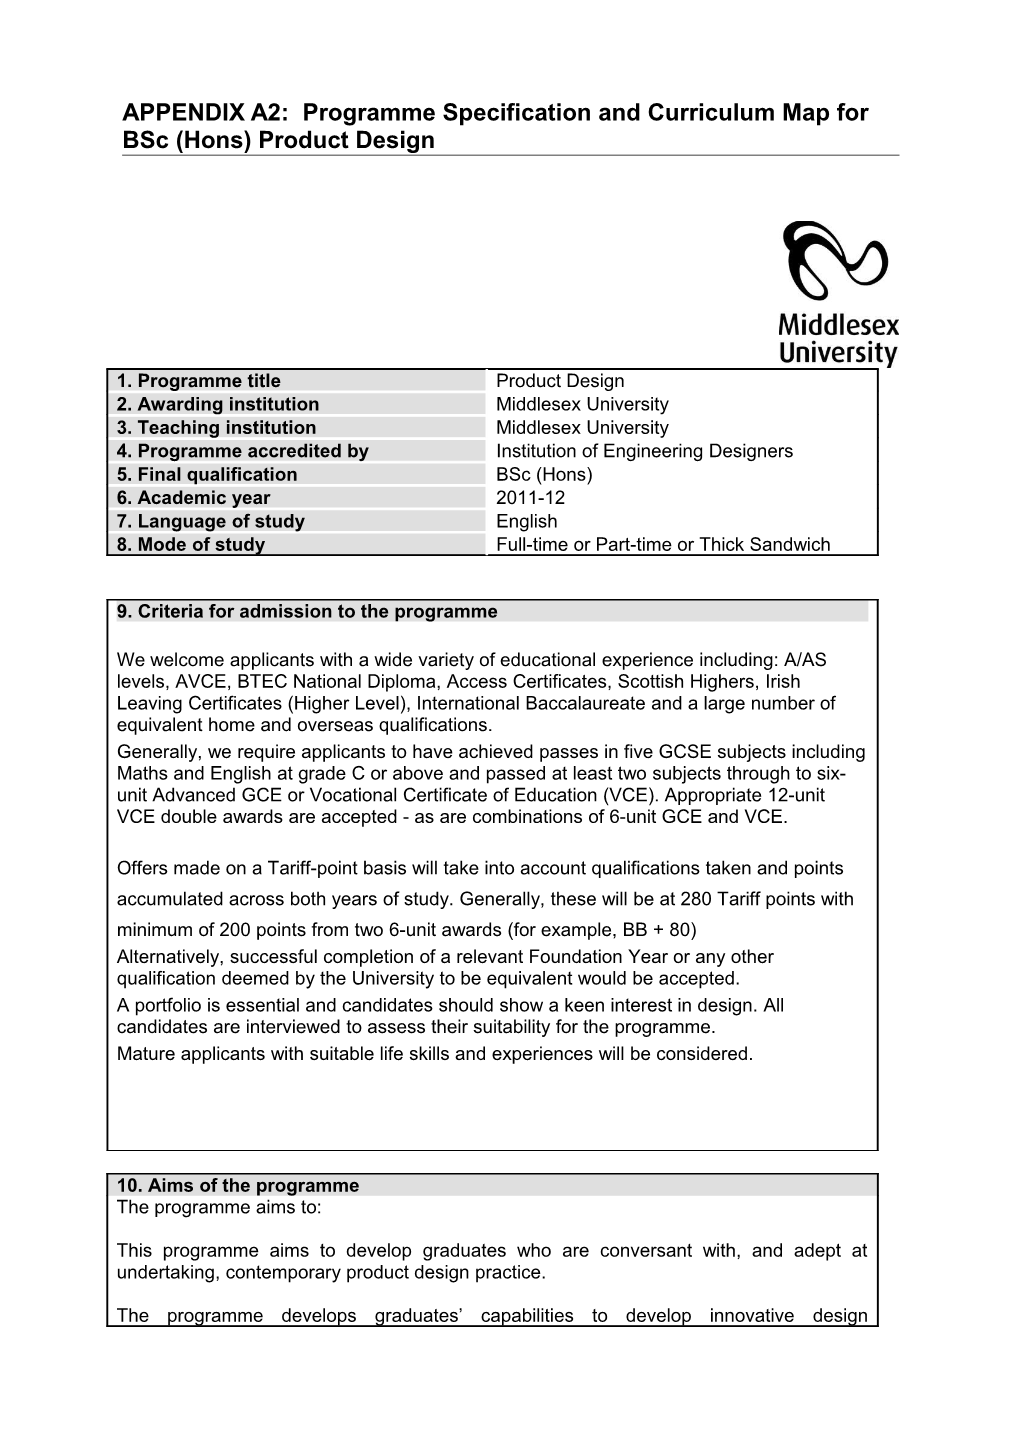 APPENDIX A2: Programme Specification and Curriculum Map for Bsc (Hons) Product Design